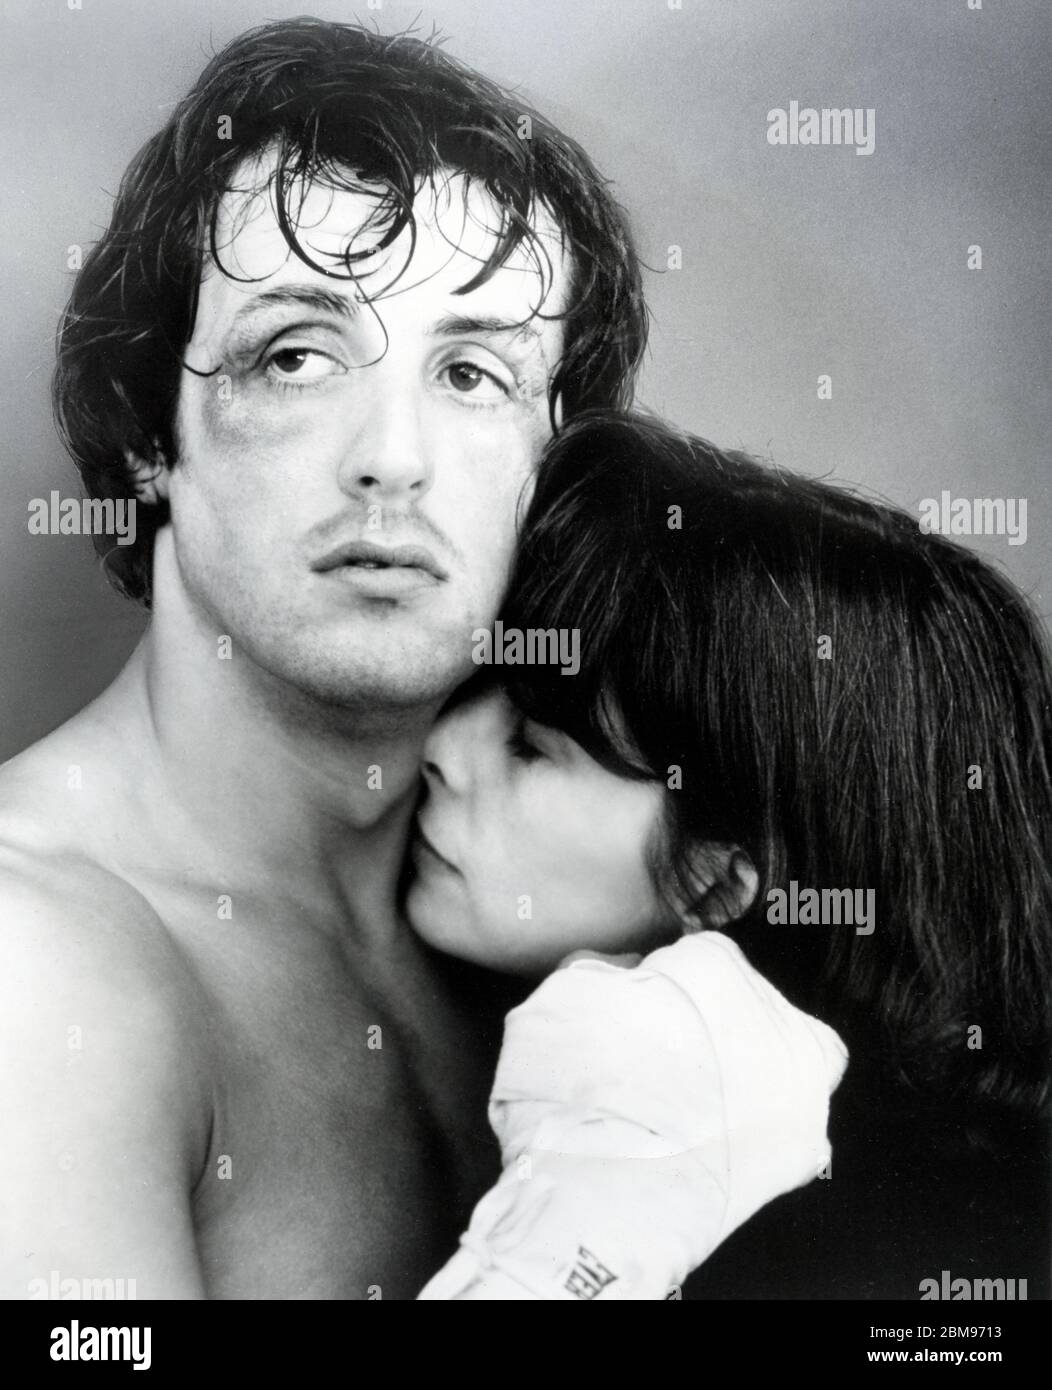 Publicity still for the movie Rocky with Sylvester Stallone and Talia Shire circa 1976 from United Artists. Stock Photo